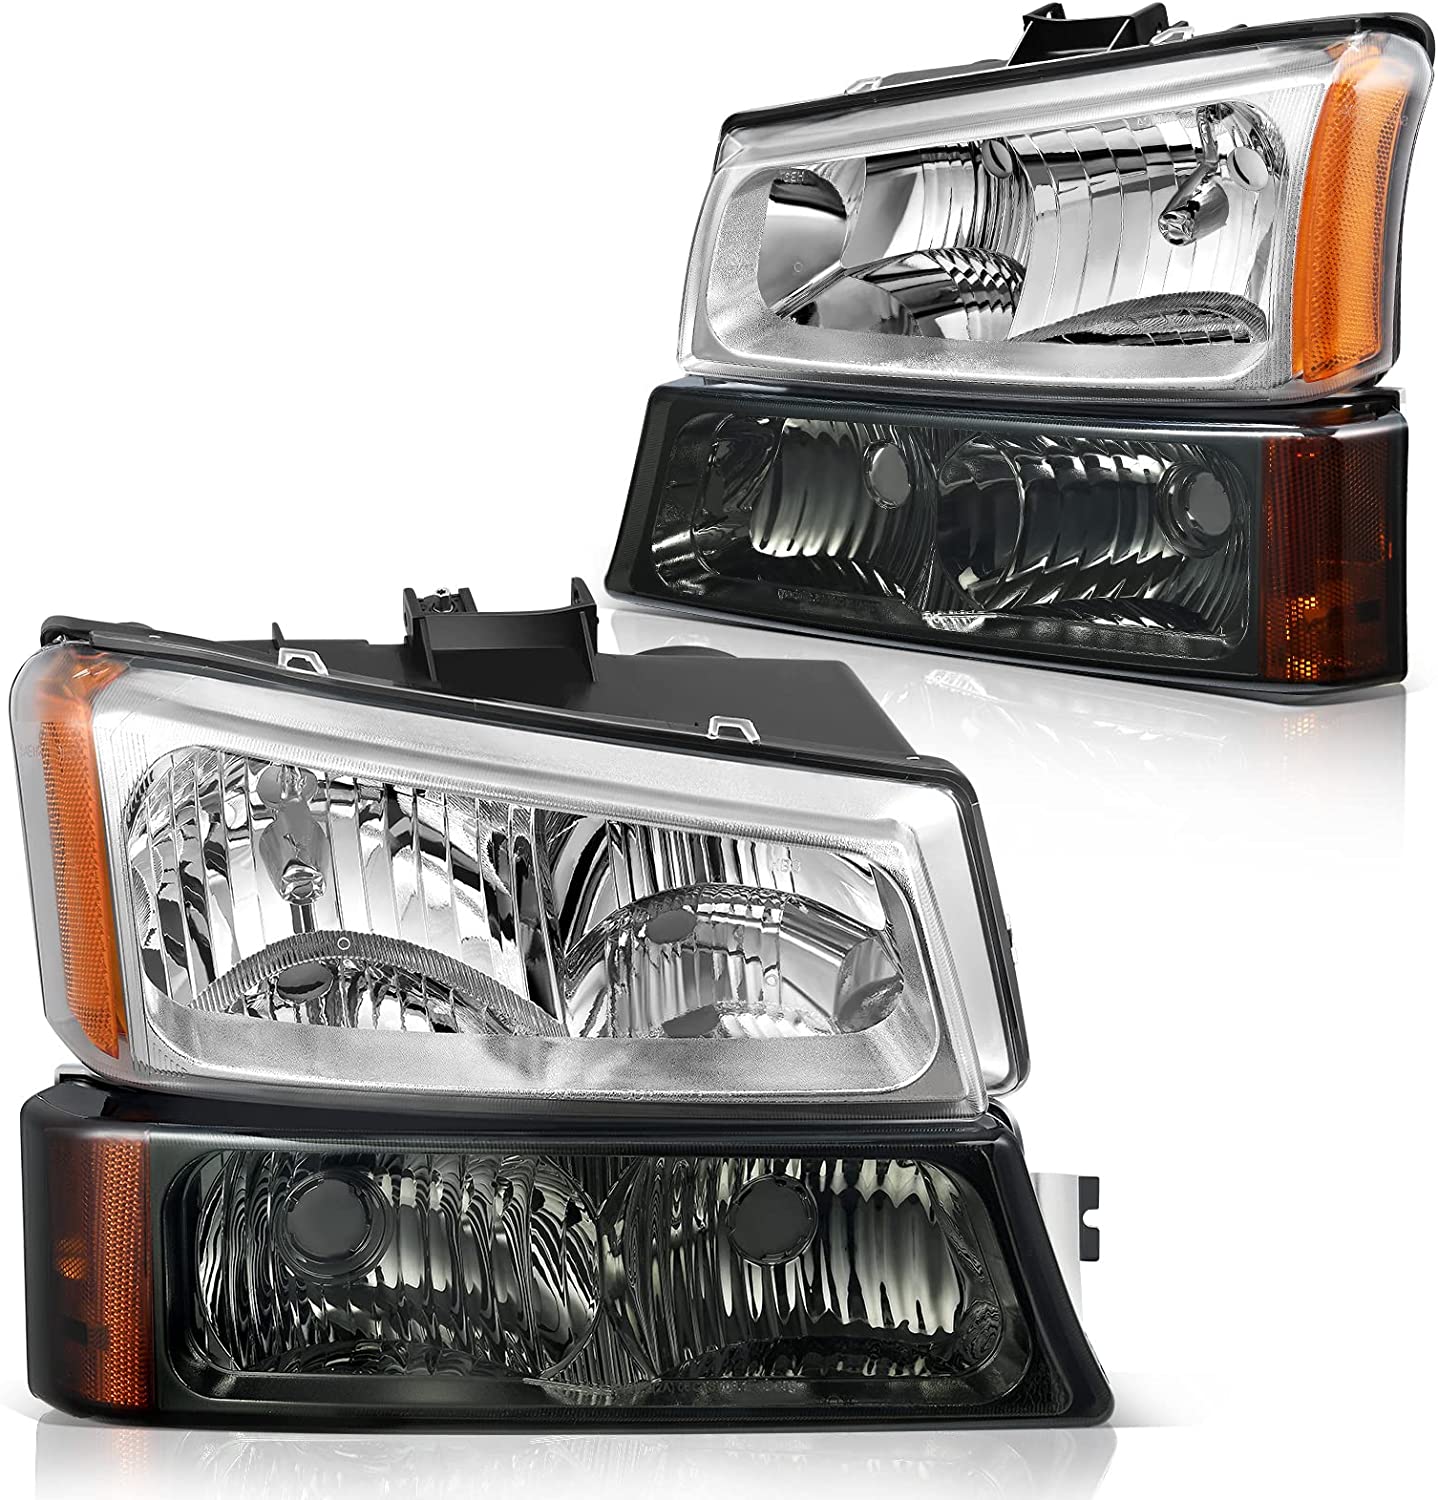 DWVO Headlight Assembly Compatible with Chevy Silverado Avalanche 1500 2500 3500 Black with Clear Housing